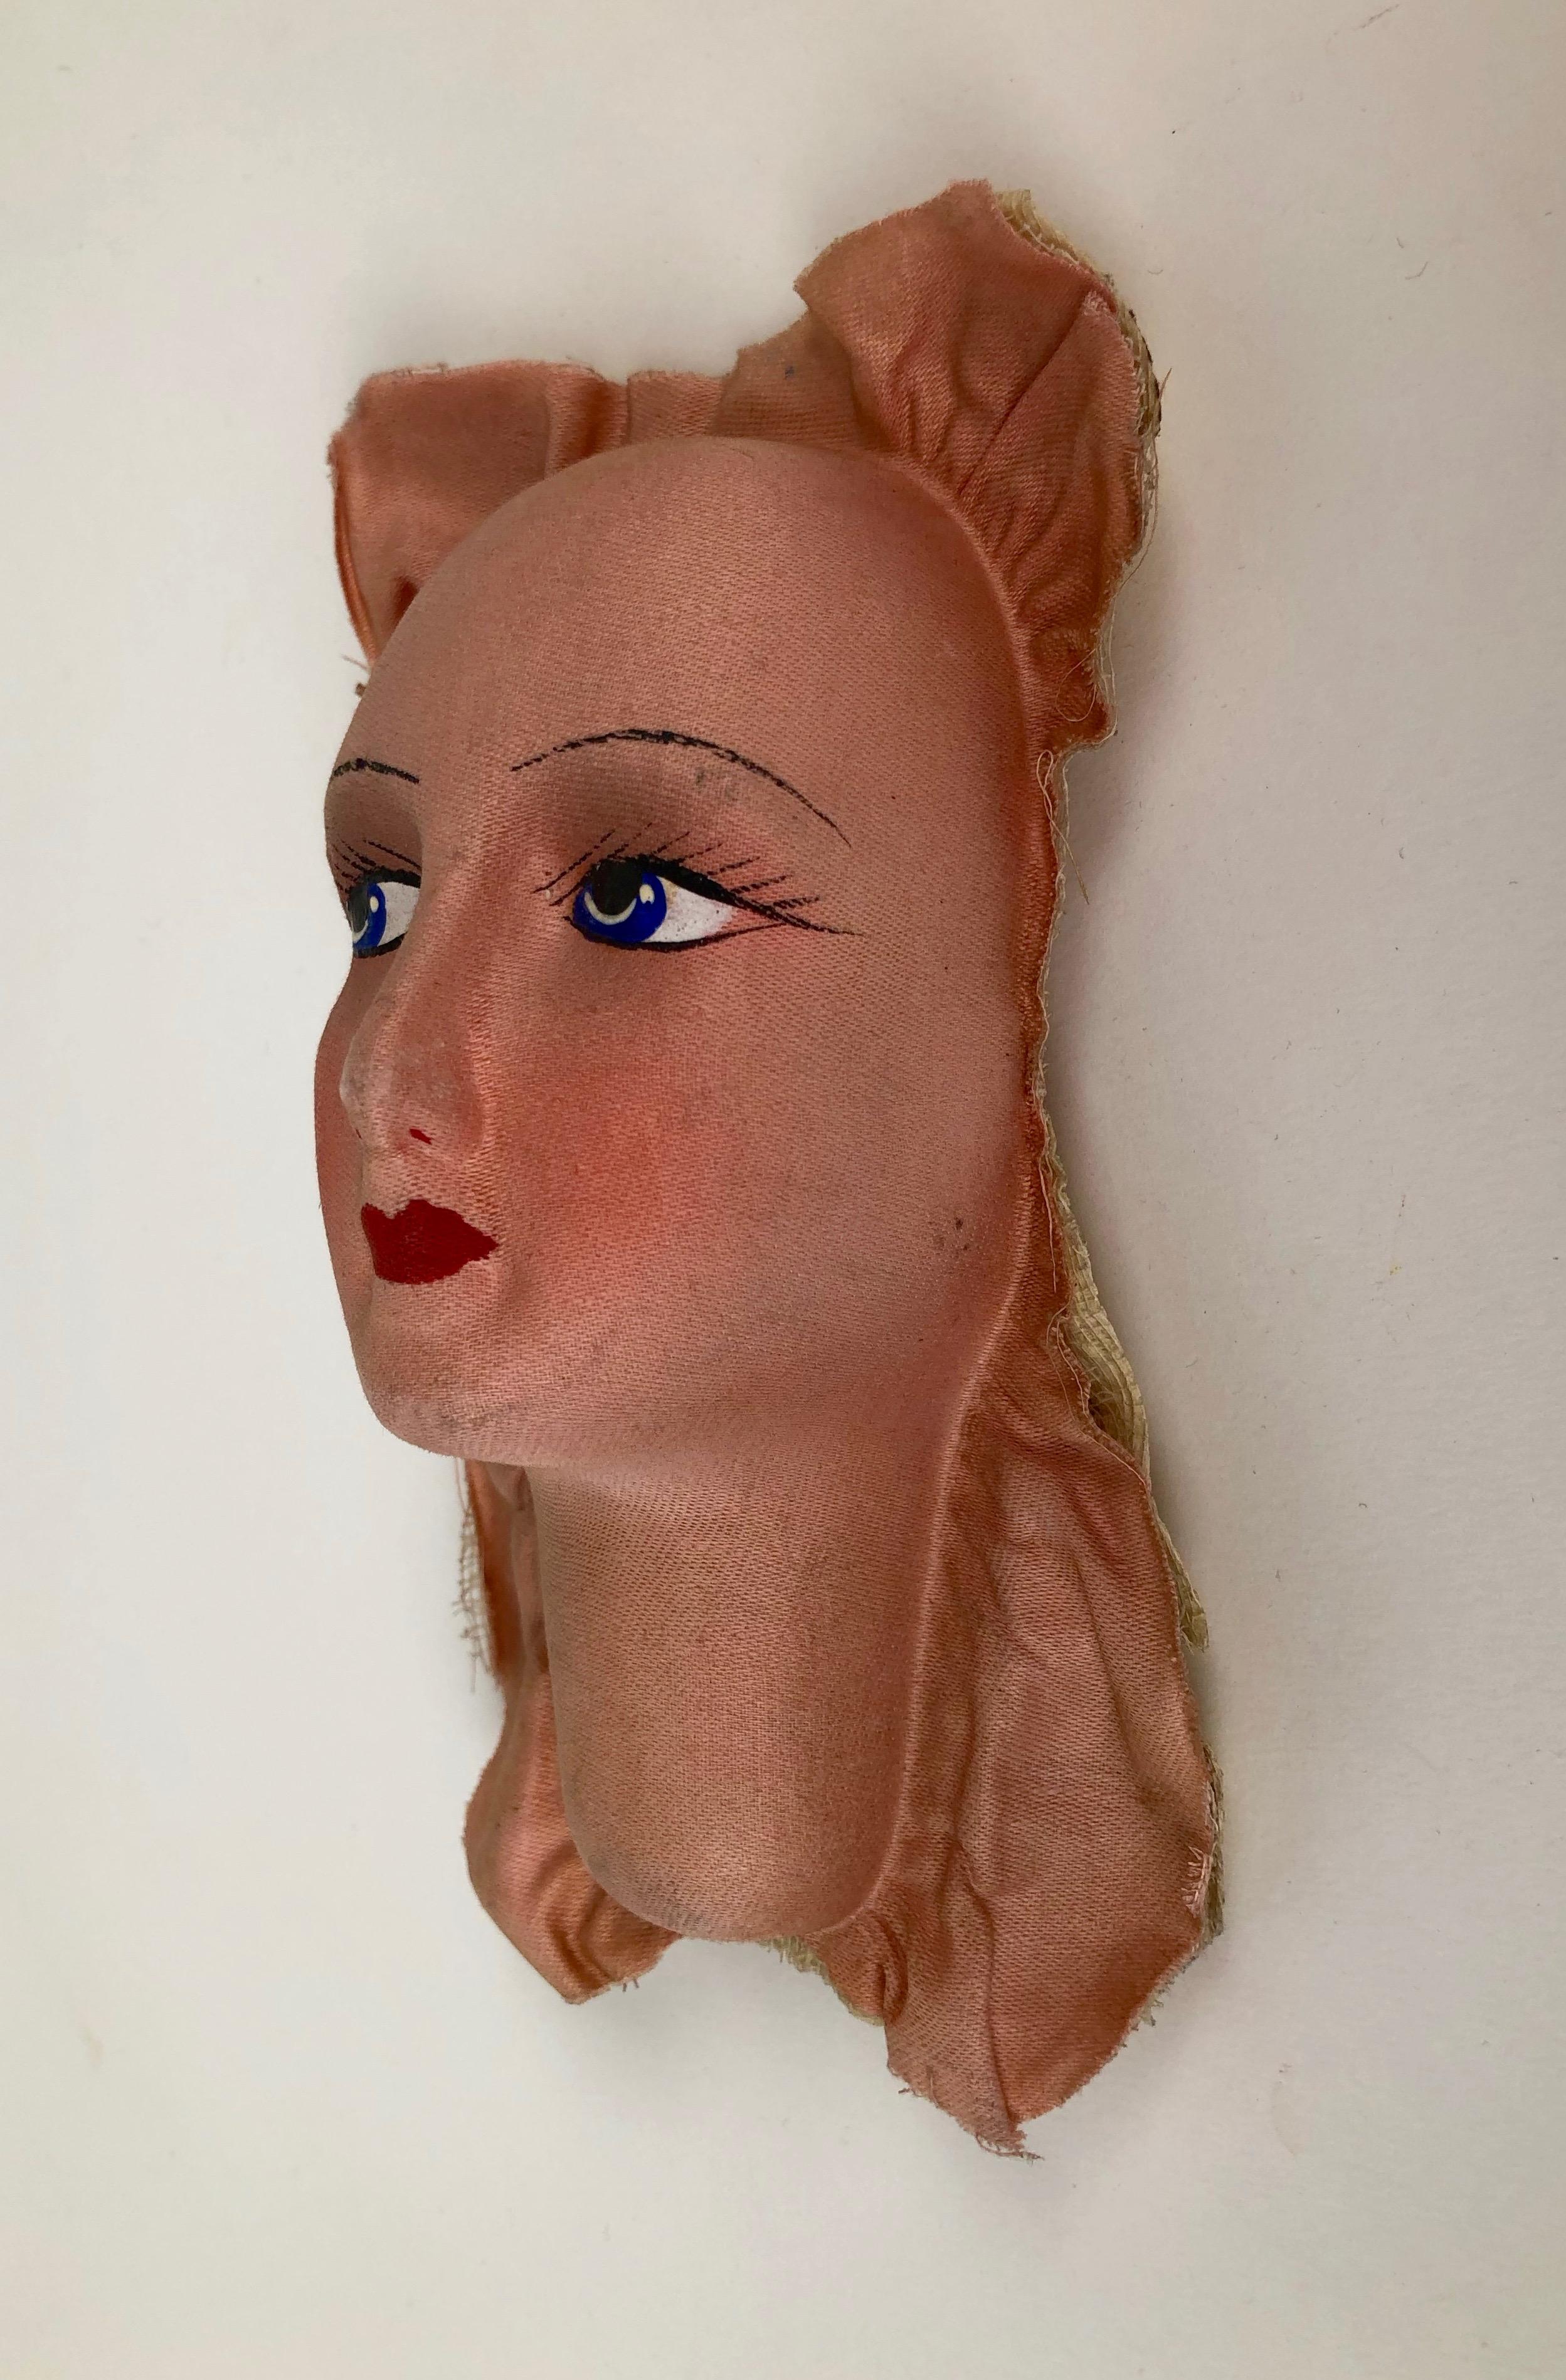 doll faces for sale